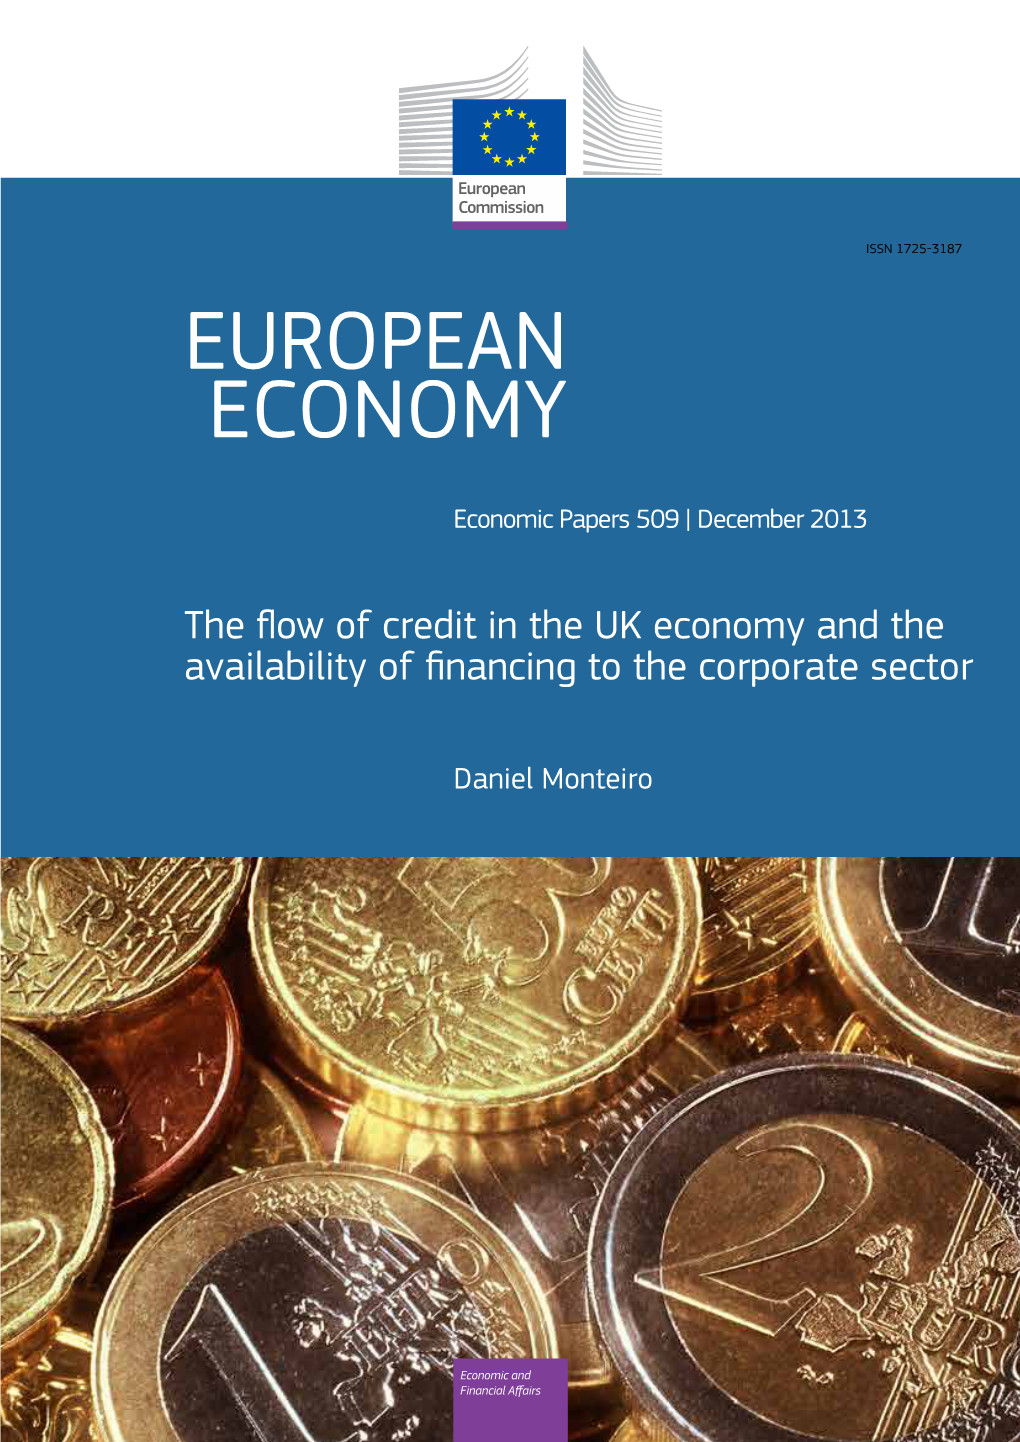 The Flow of Credit in the UK Economy and the Availability of Financing to the Corporate Sector